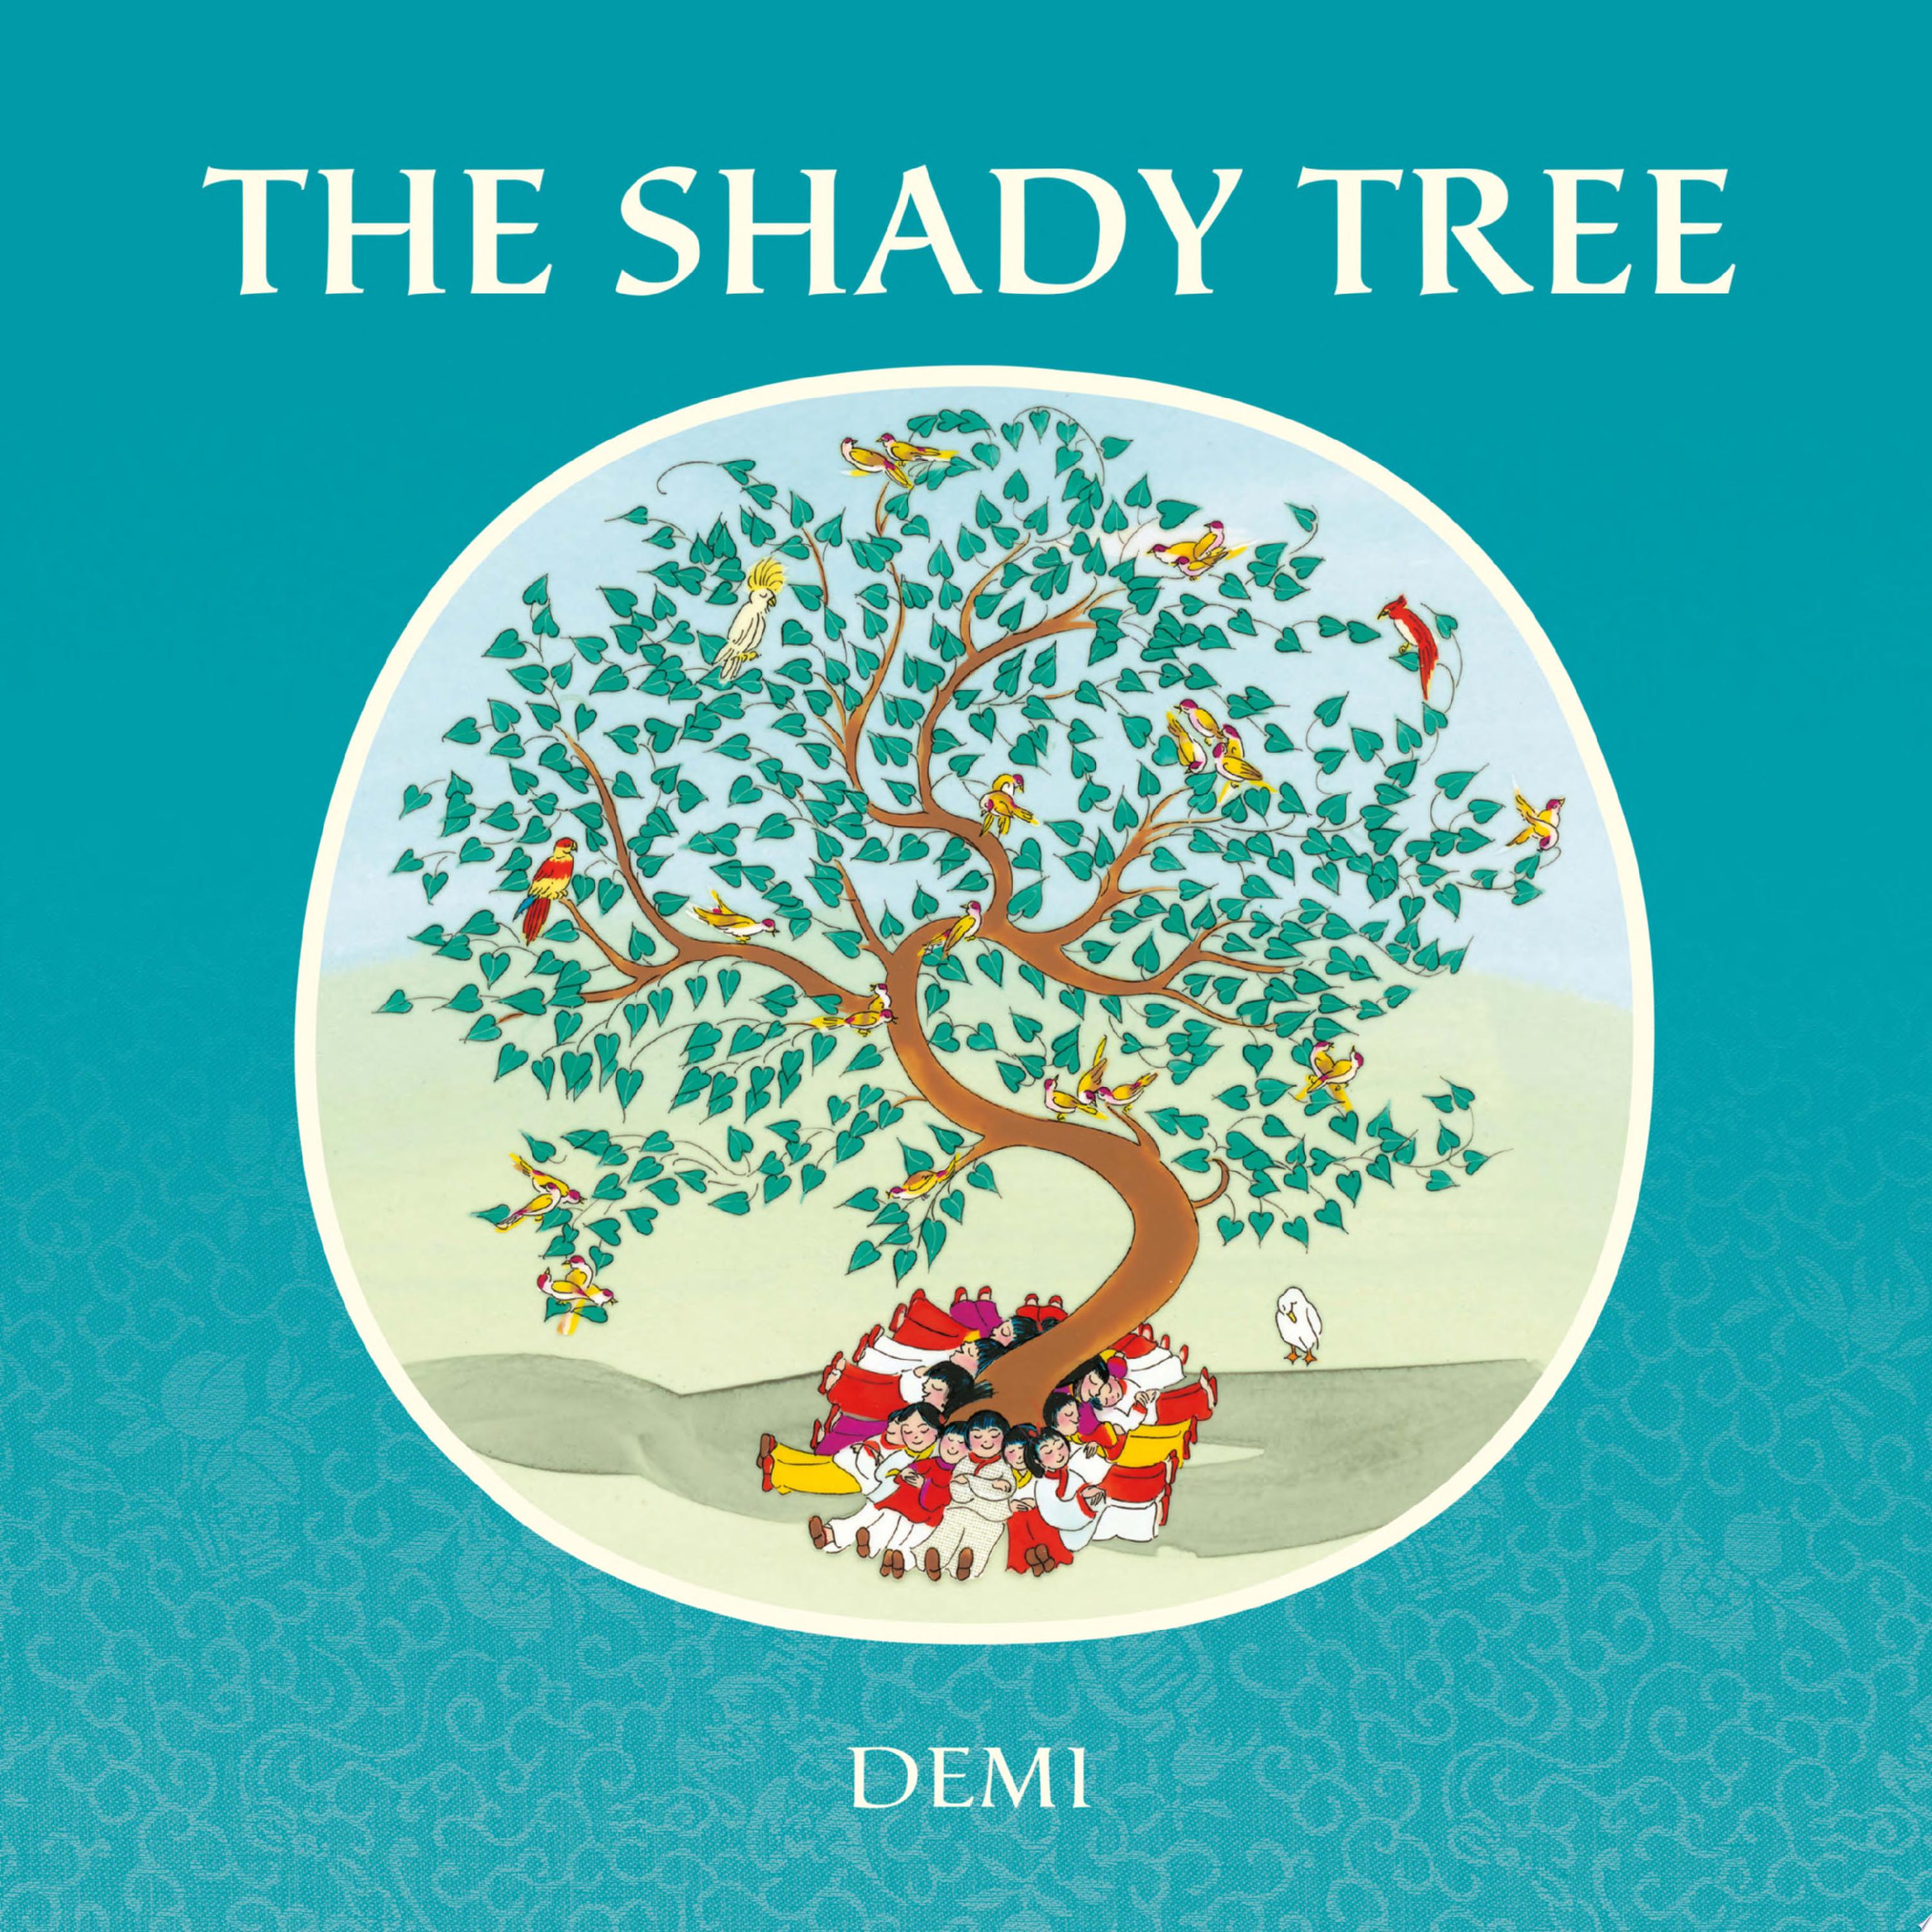 Image for "The Shady Tree"